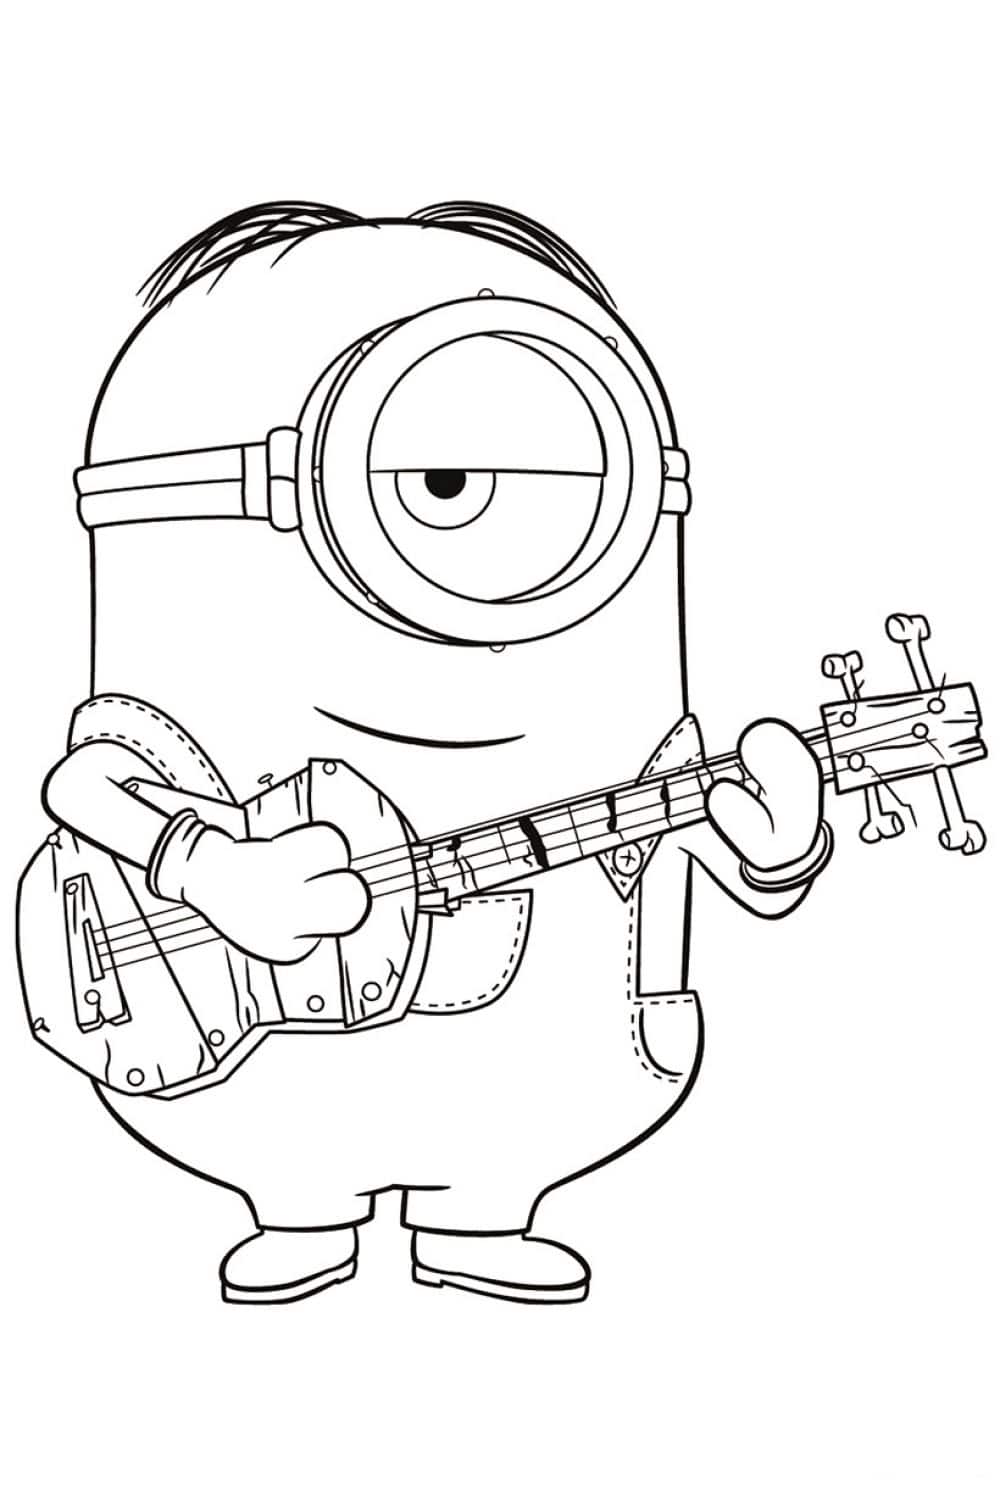 Minion playing the guitar